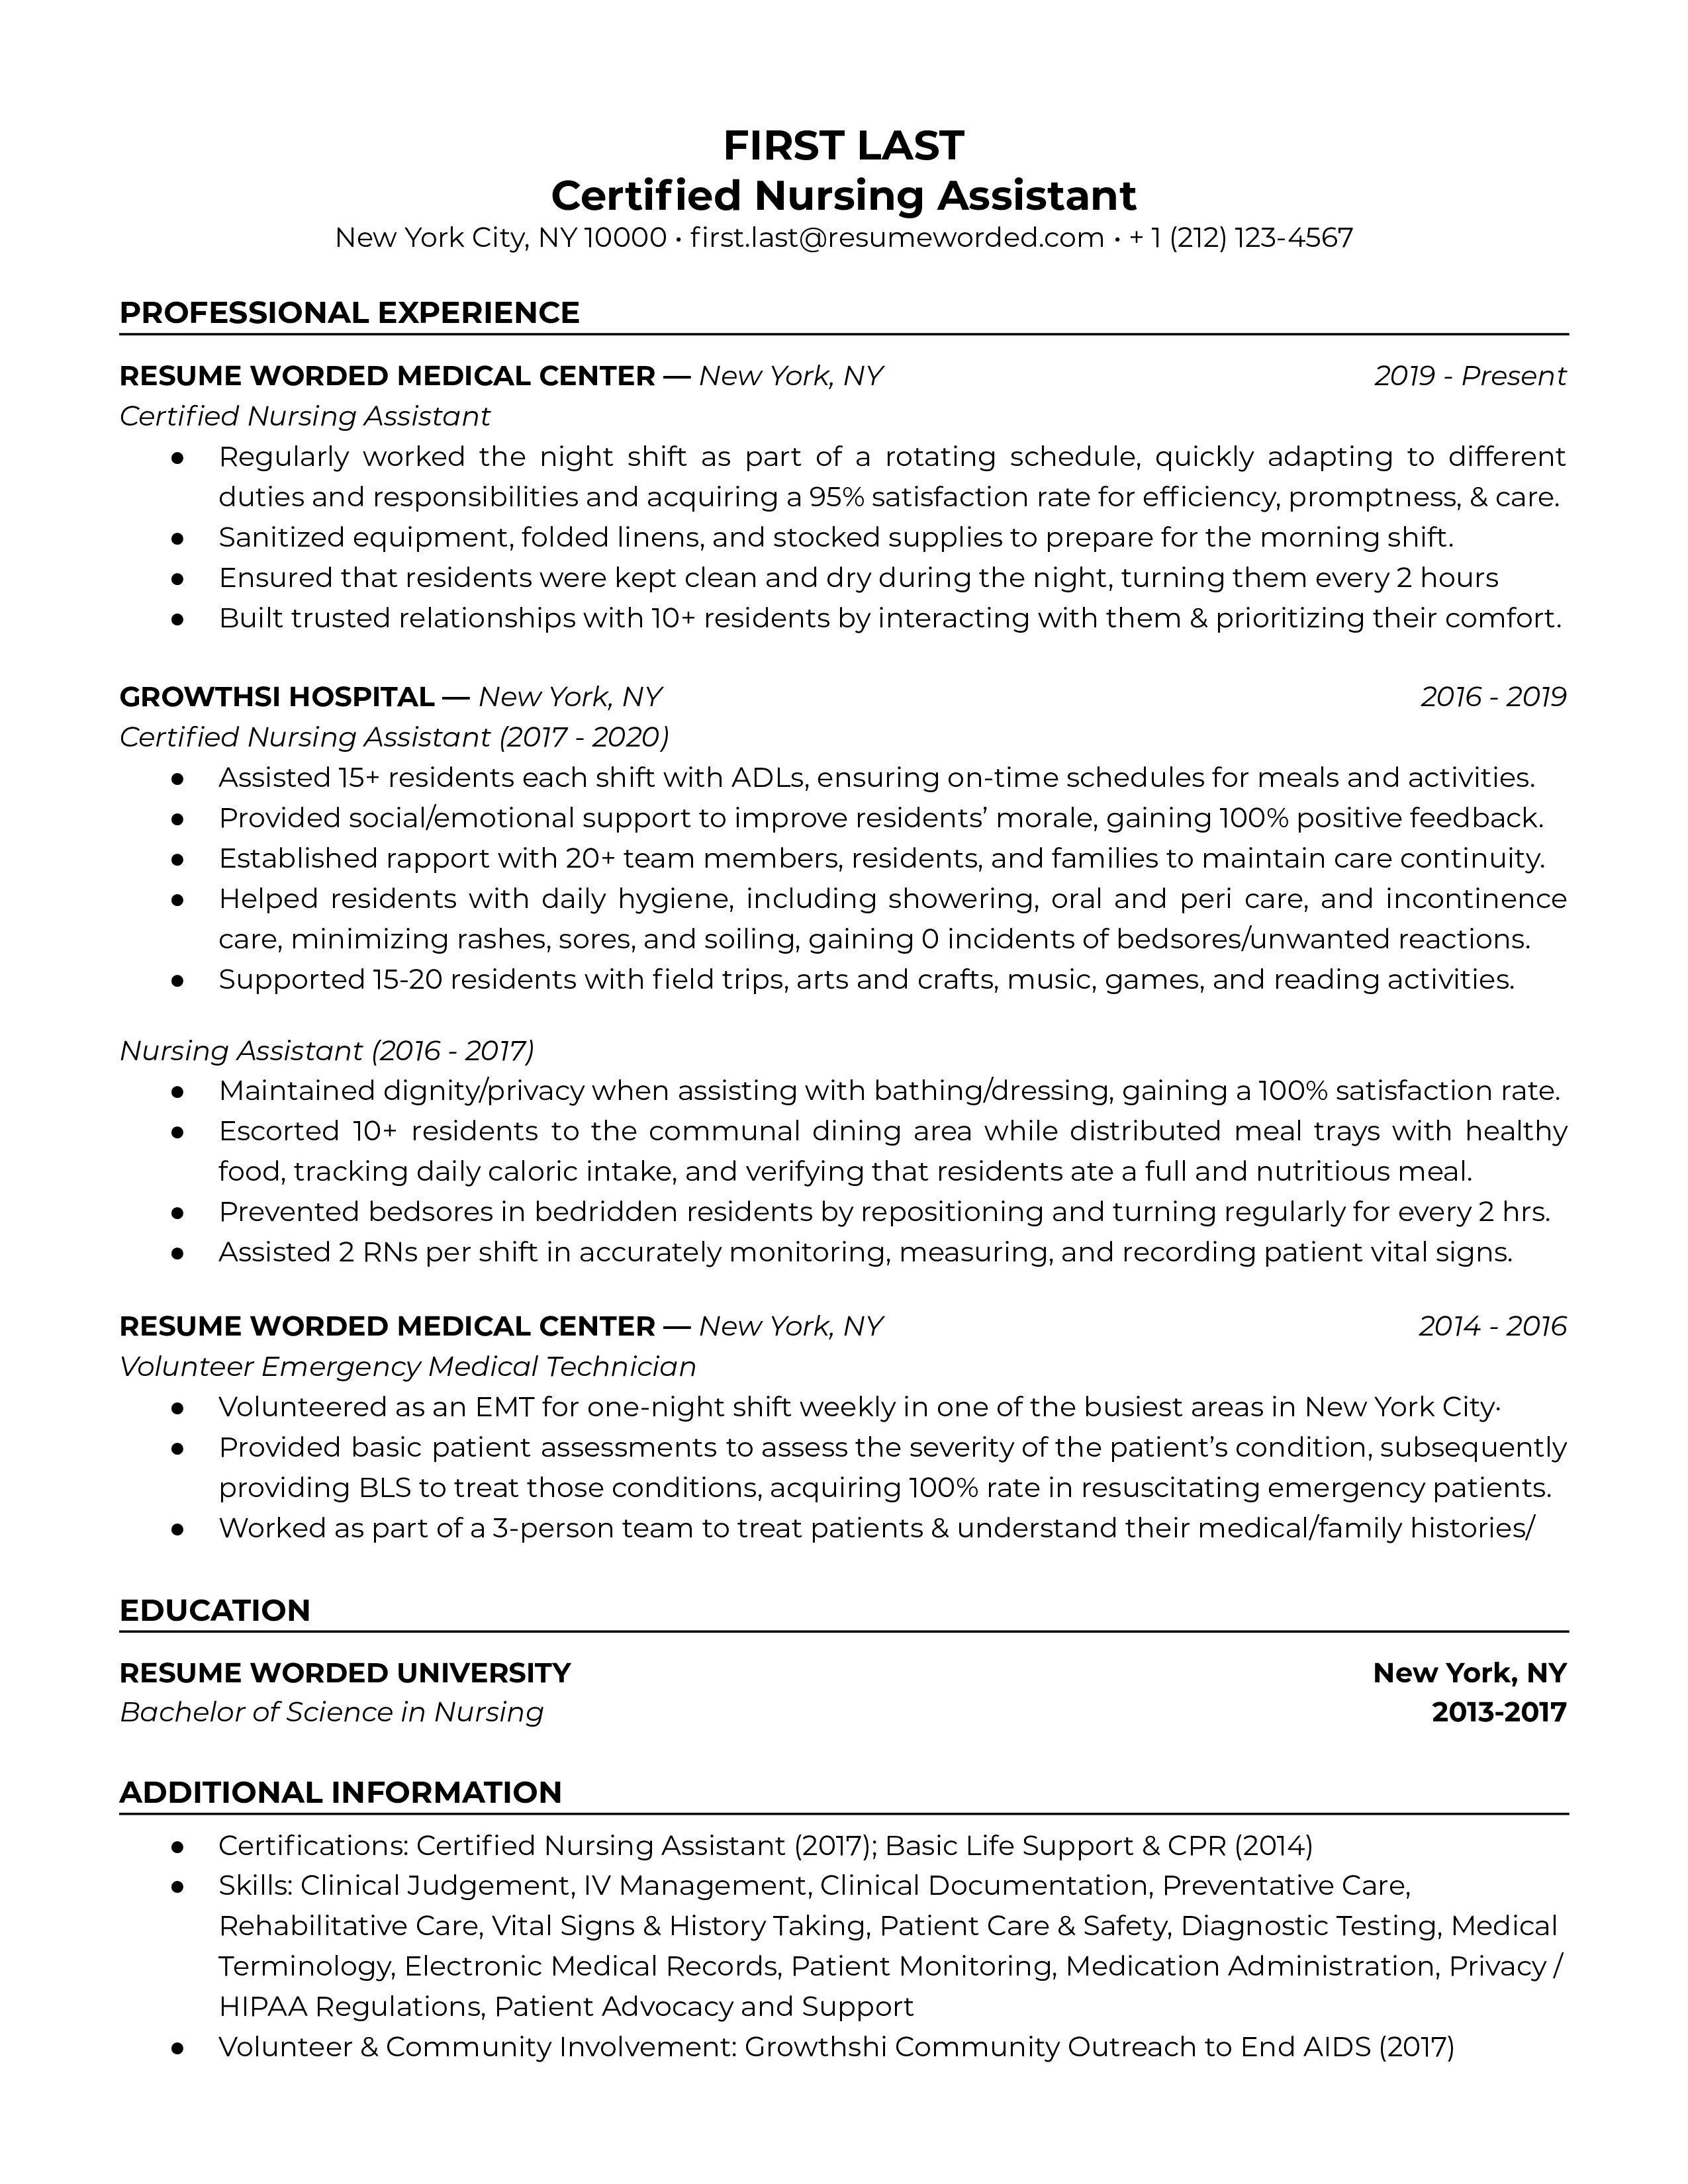 Certified nursing assistant resume template sample featuring a clear resume title and showcasing volunteer work experience